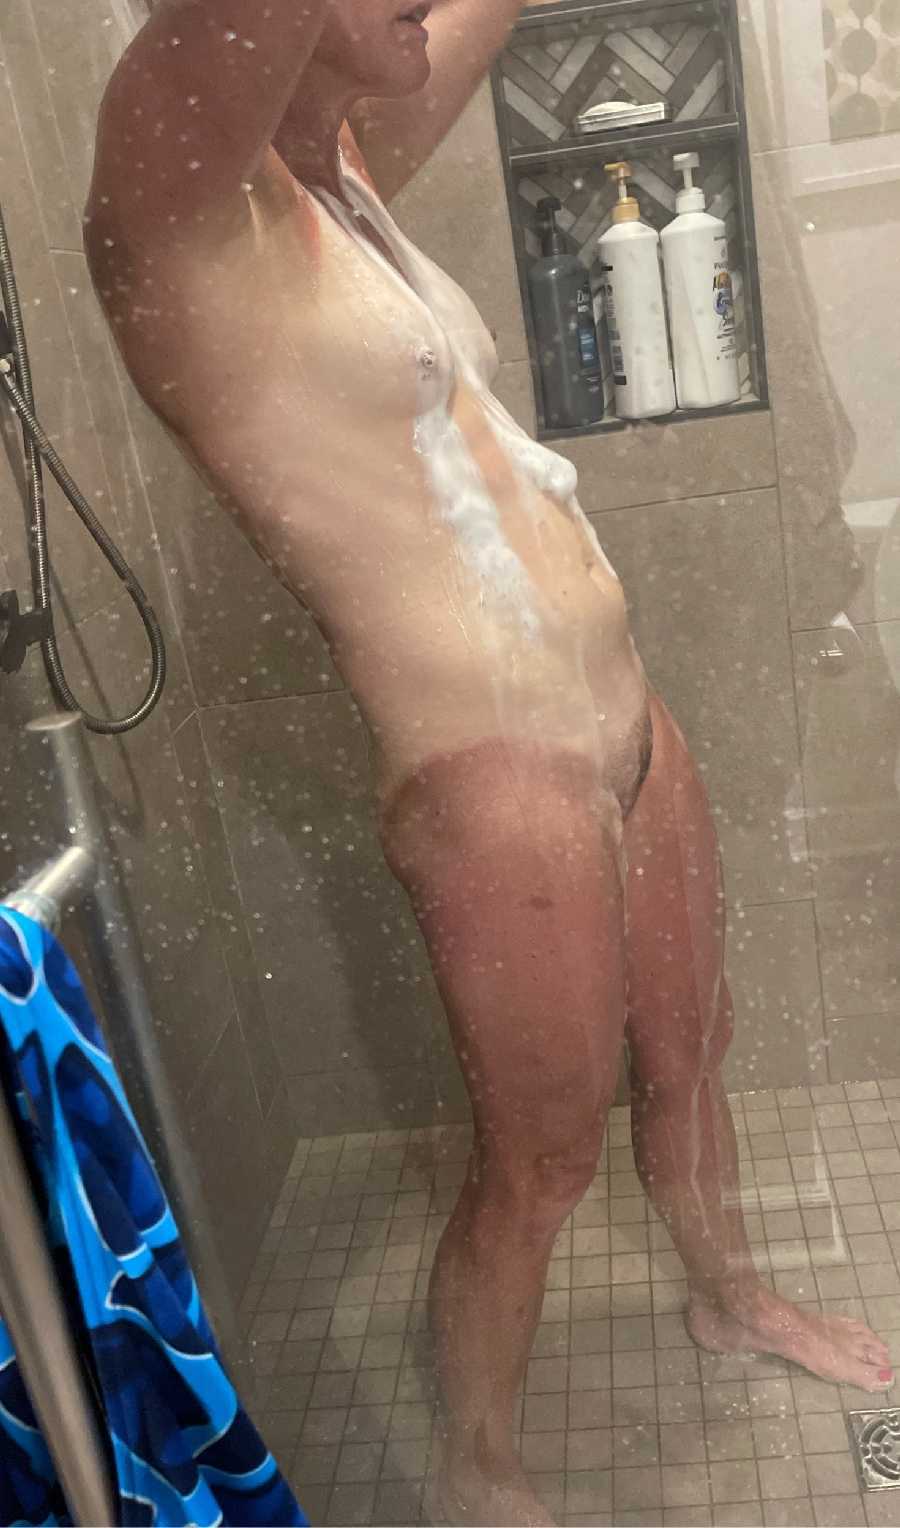 Showering off after a Swim